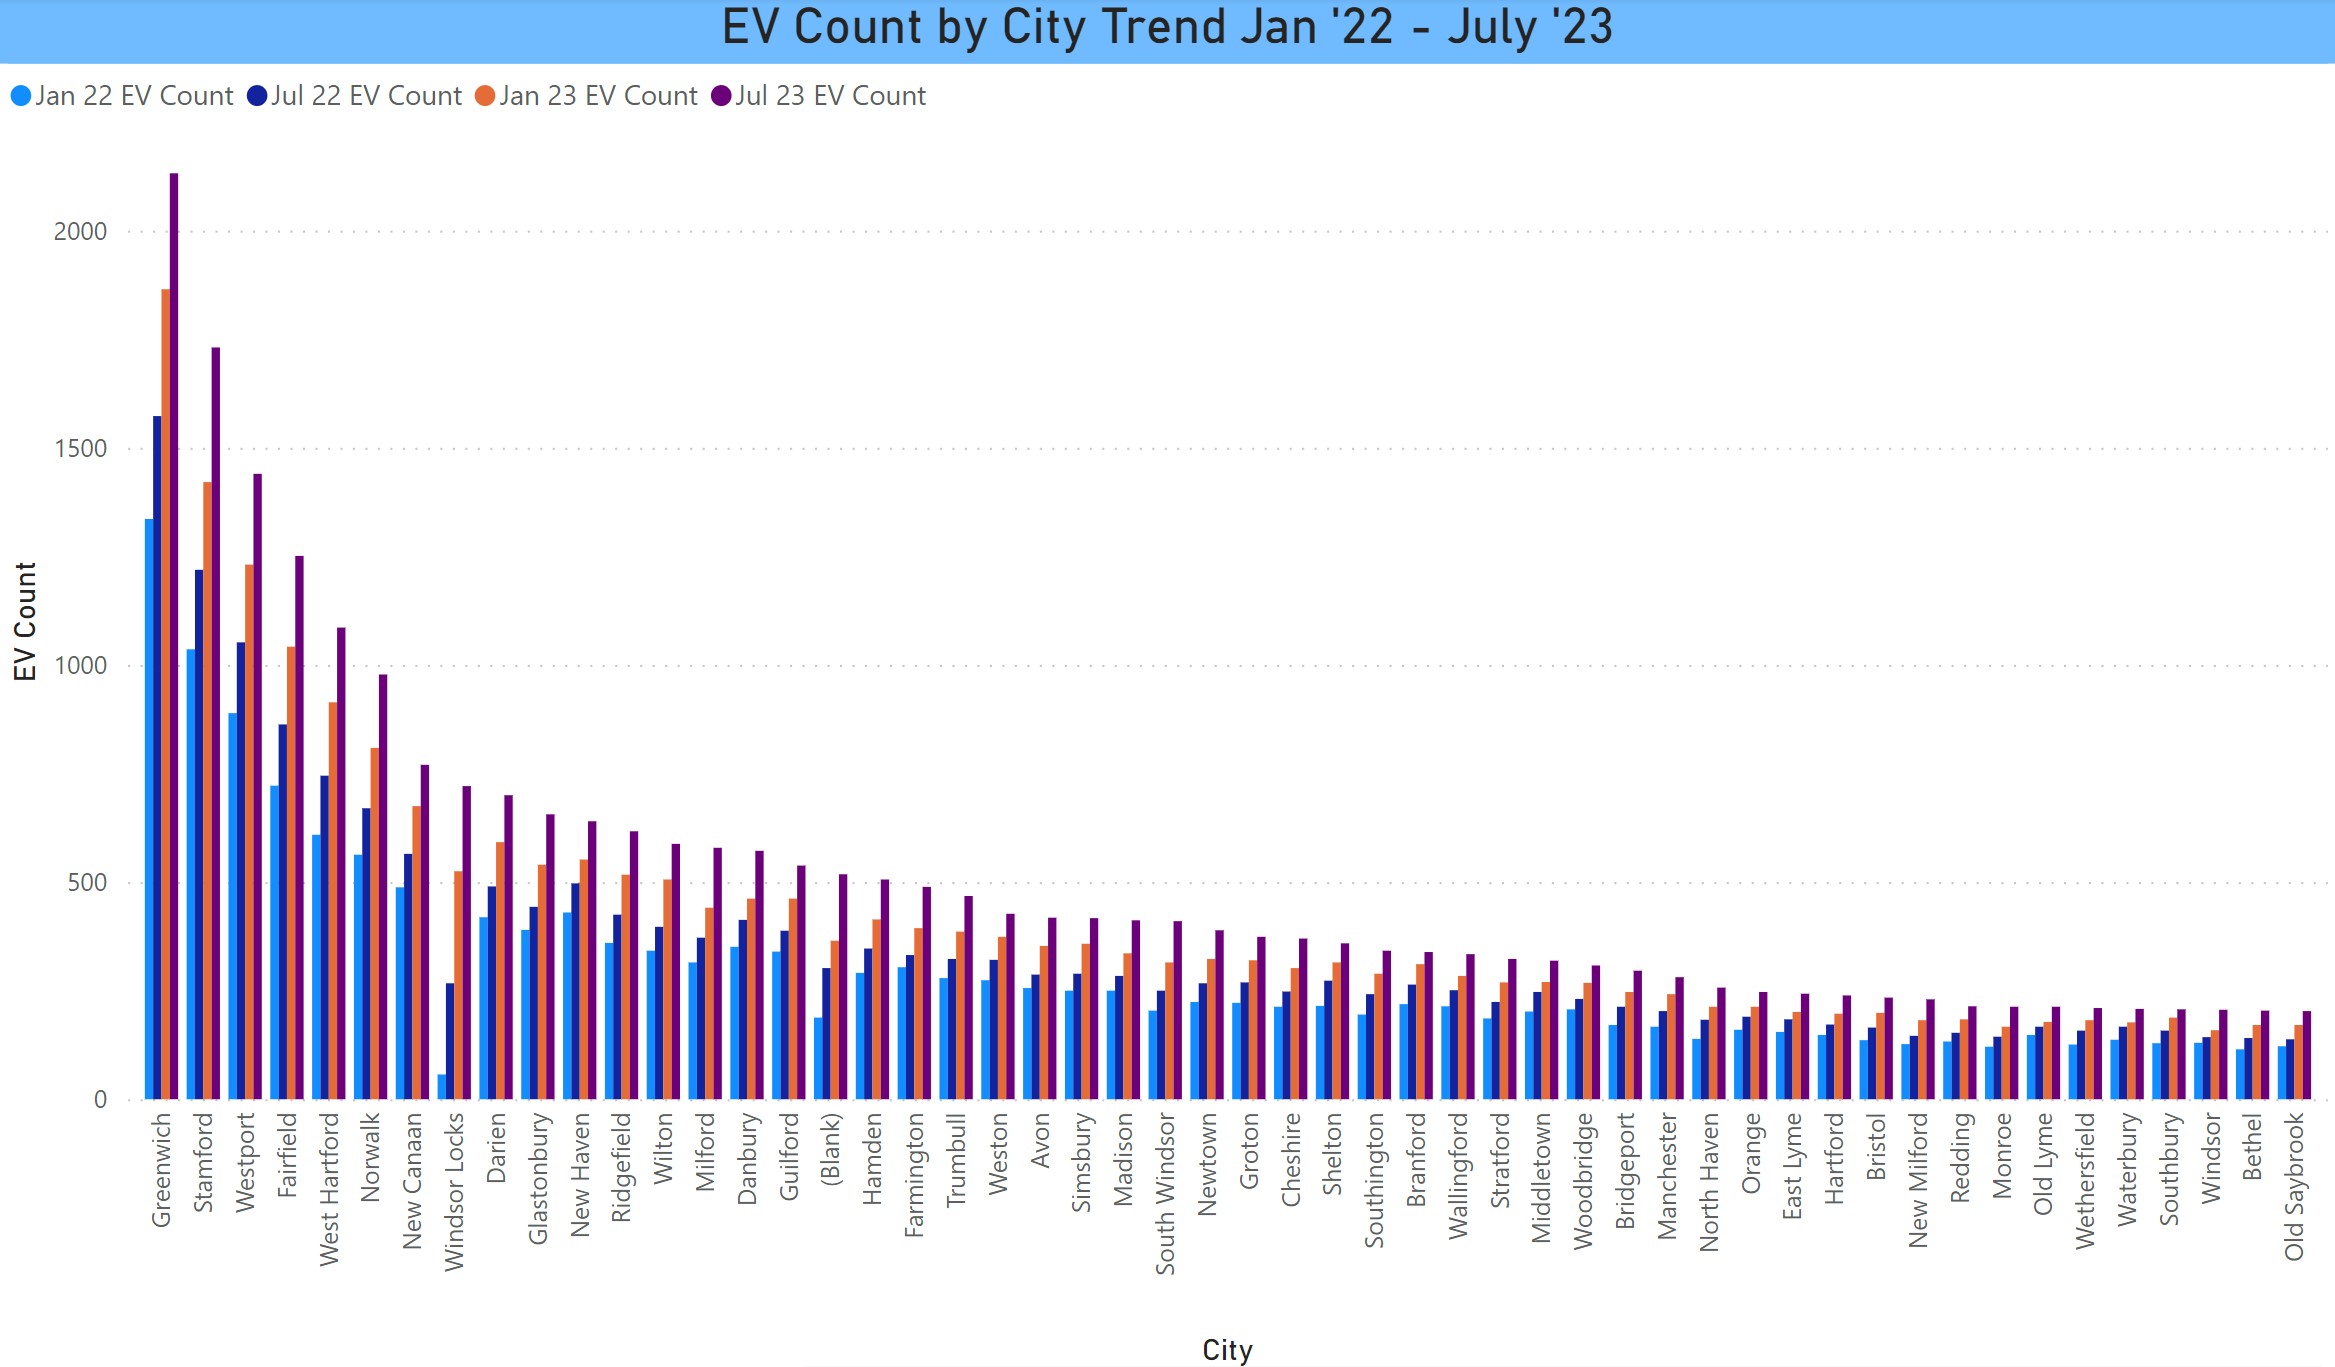 Trend of EVs by City Jan '22 - July '23